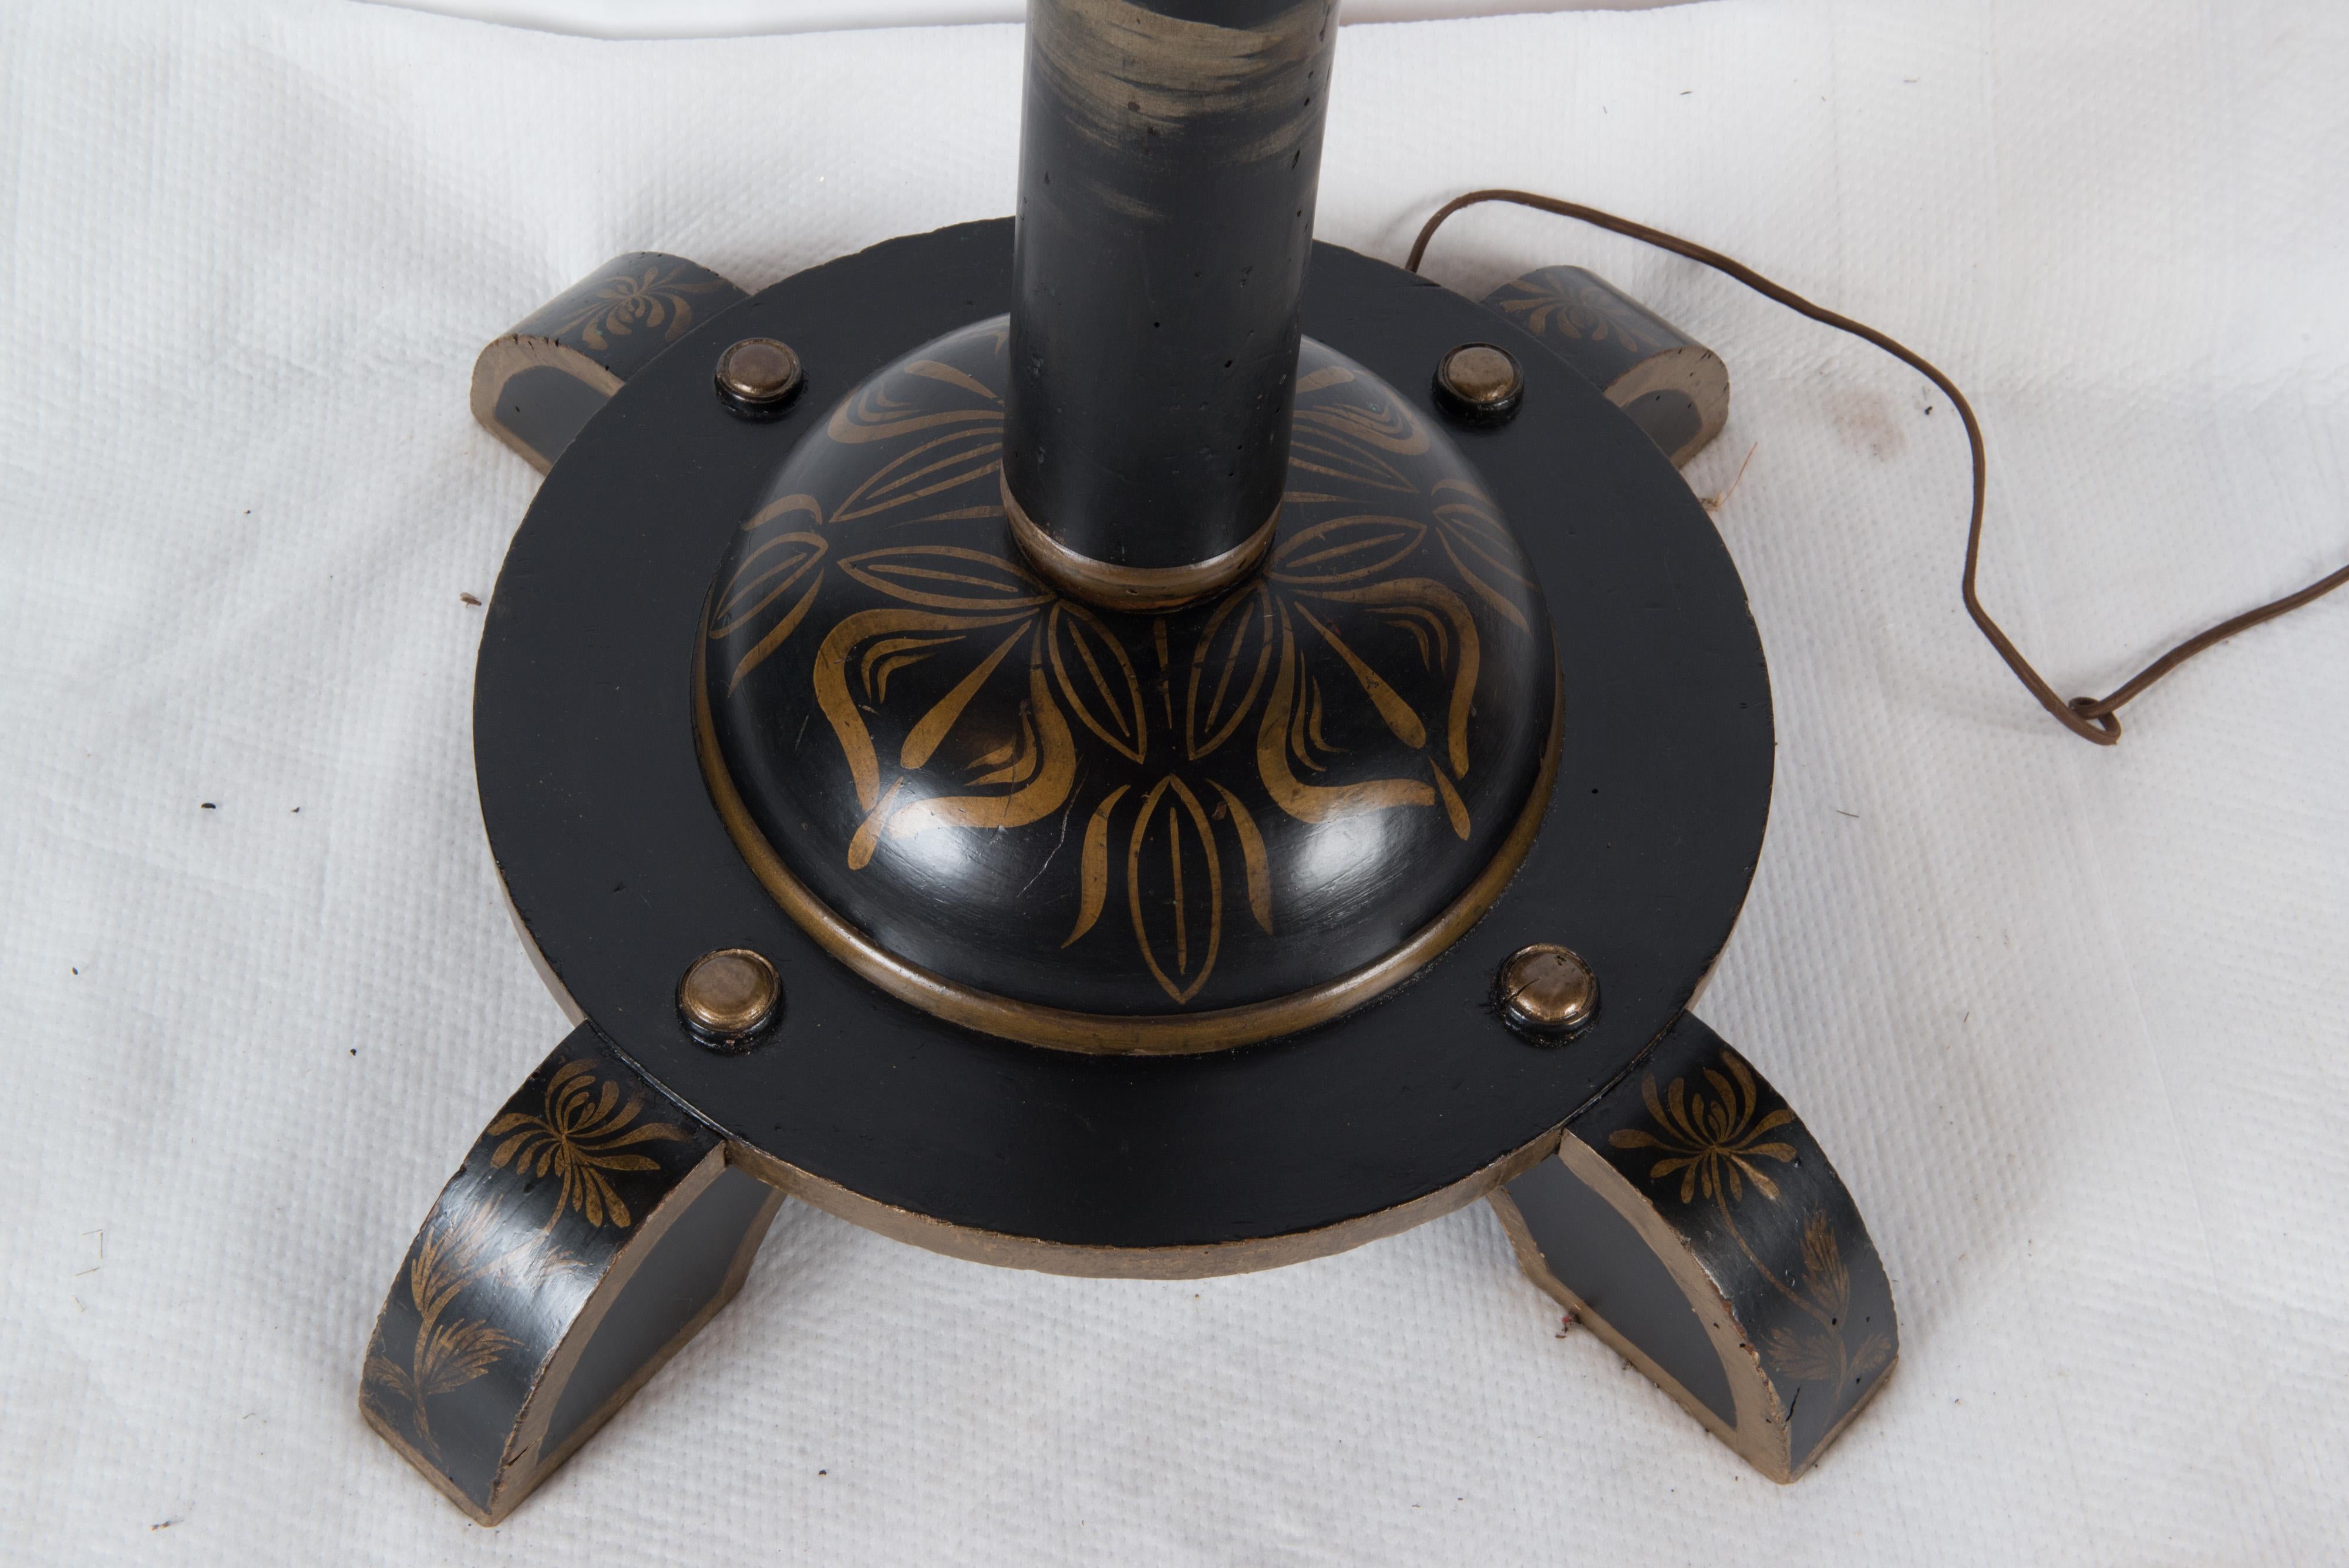 Black background chinoiserie wood floor lamp from France. Rewired. Interesting large base.